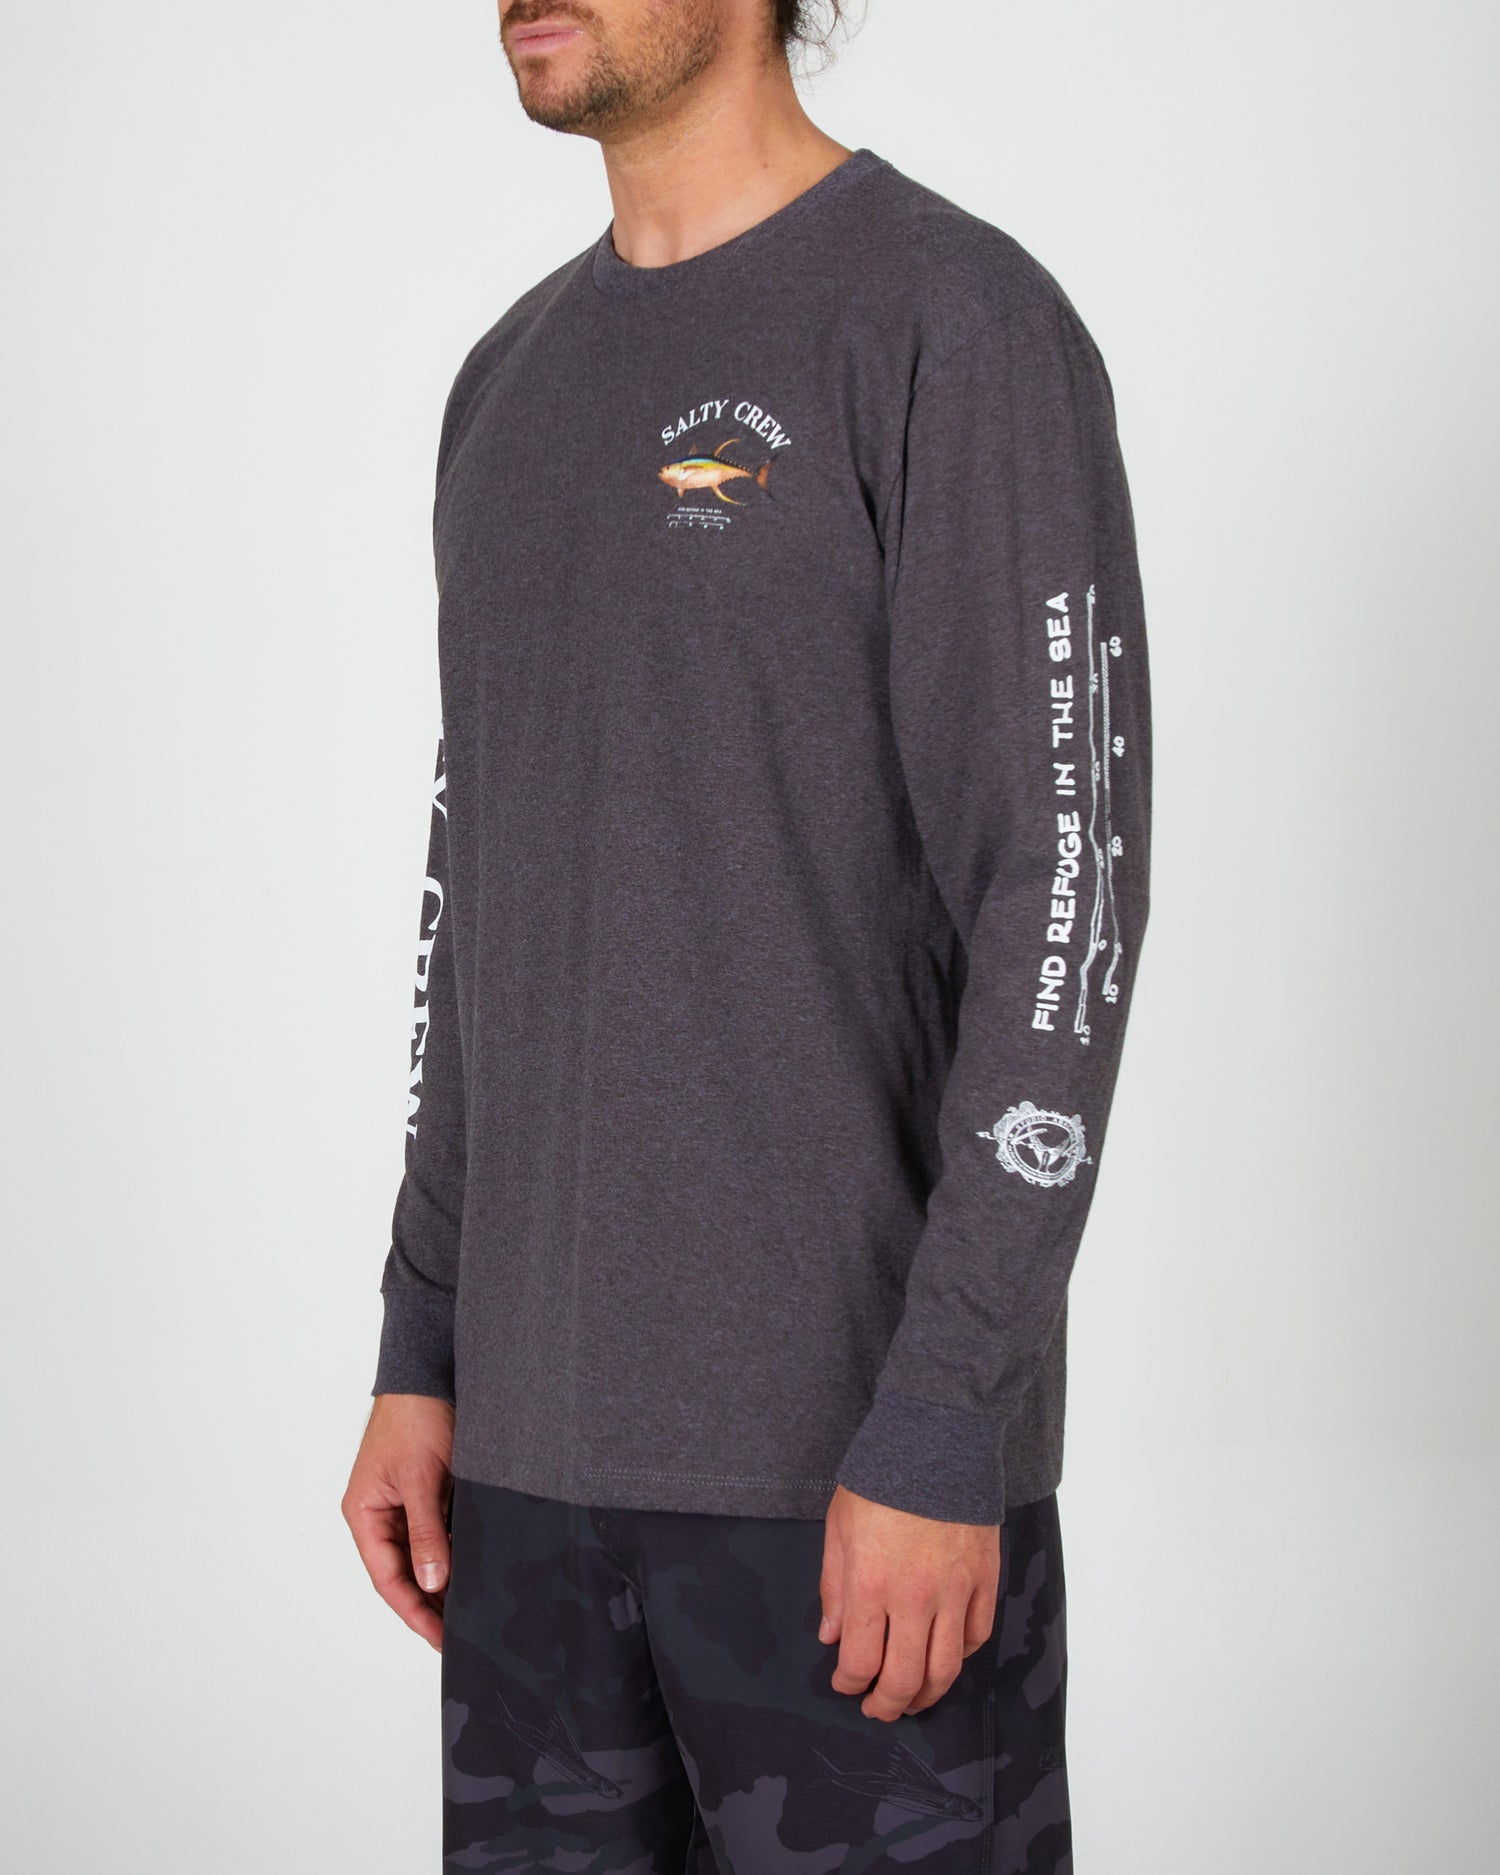 front angled Ahi Mount Charcoal Heather L/S Standard Tee